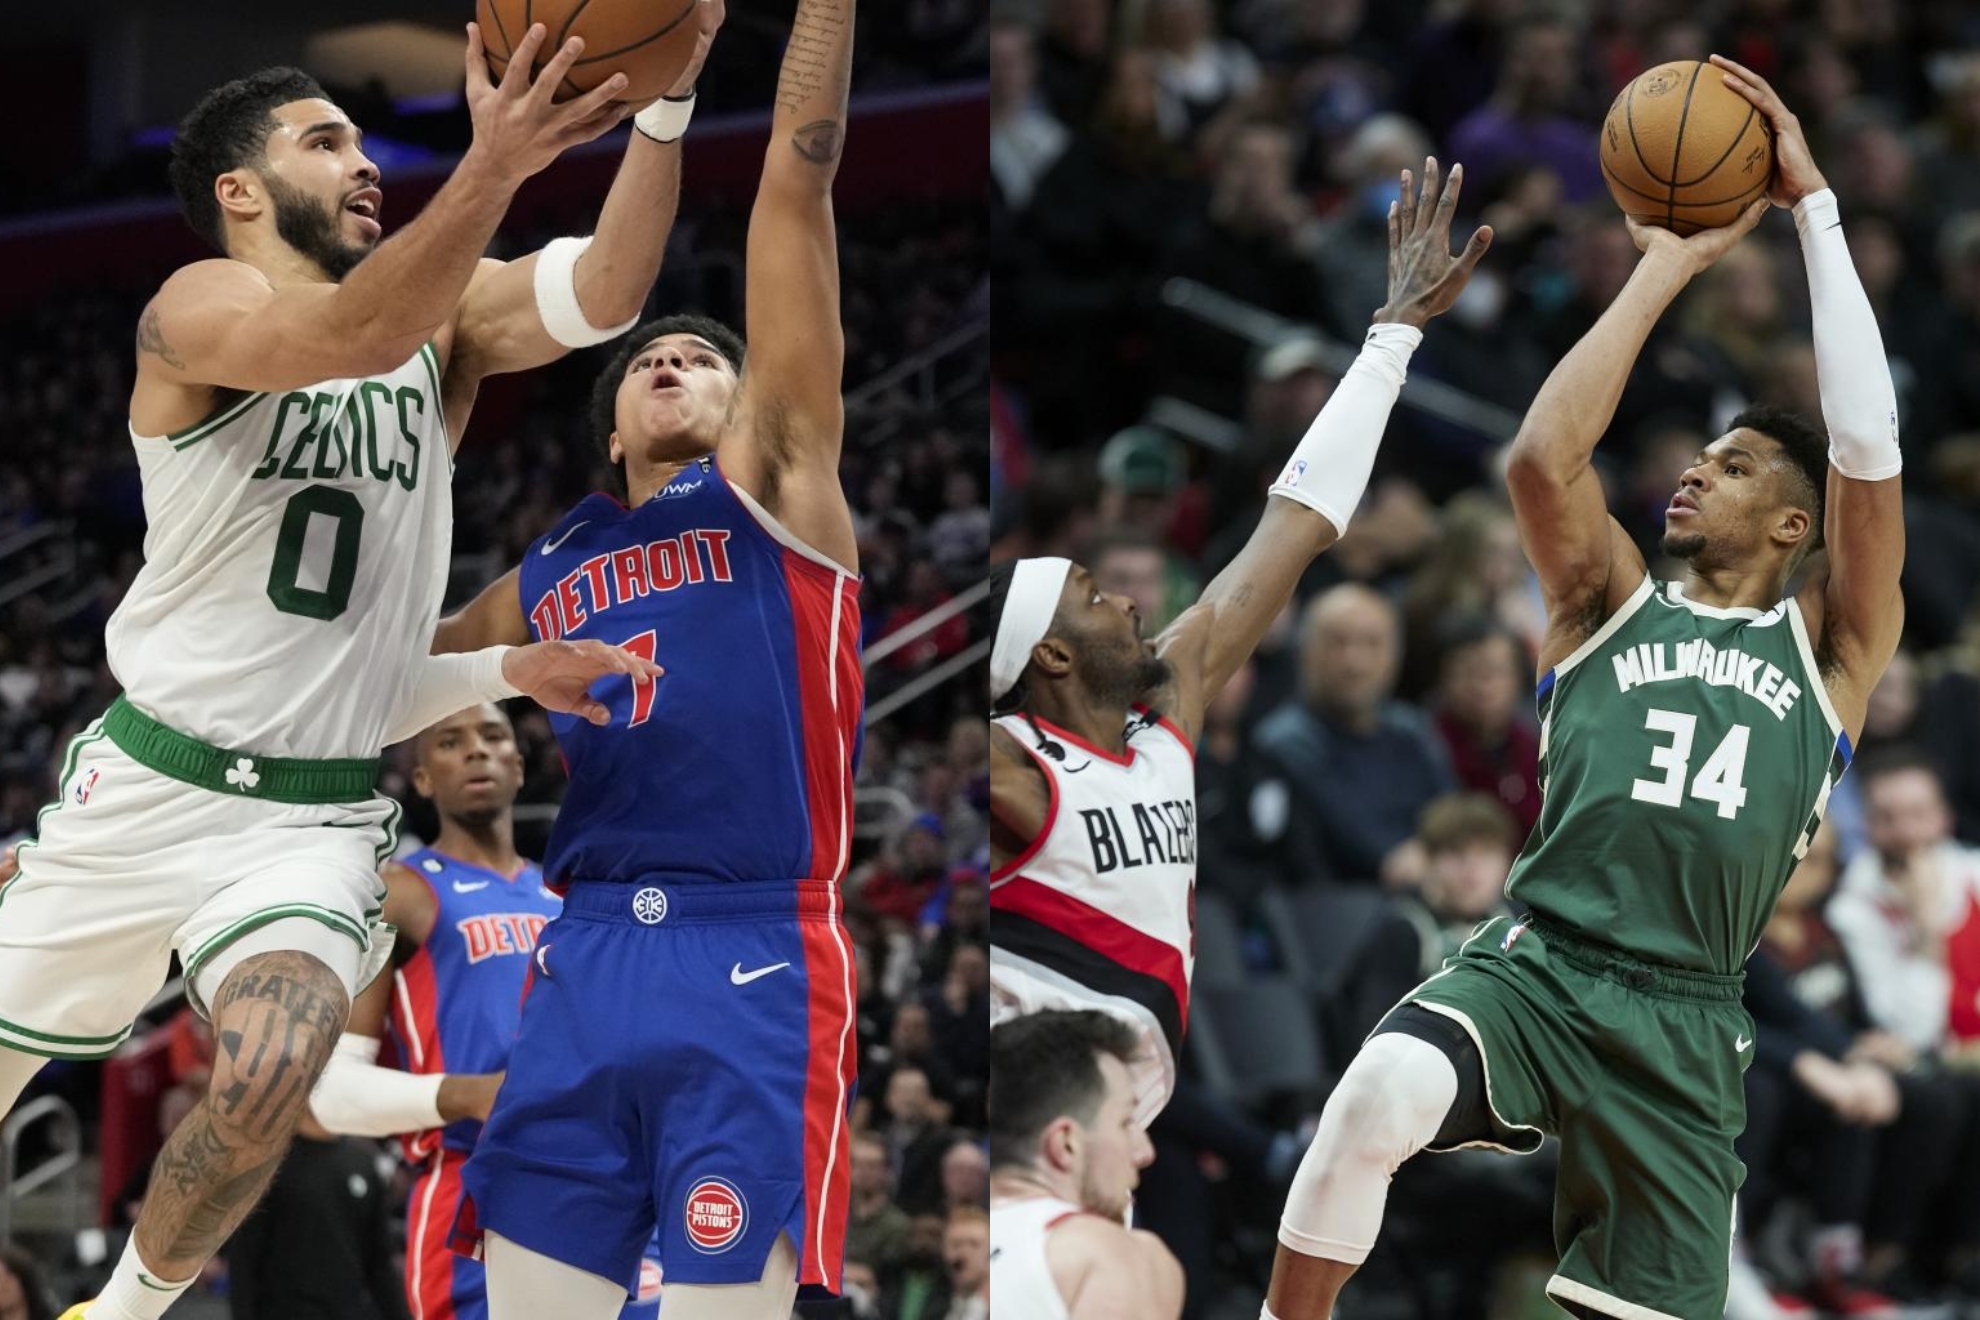 The battle that will shape the NBA: Celtics are just one win ahead of Bucks